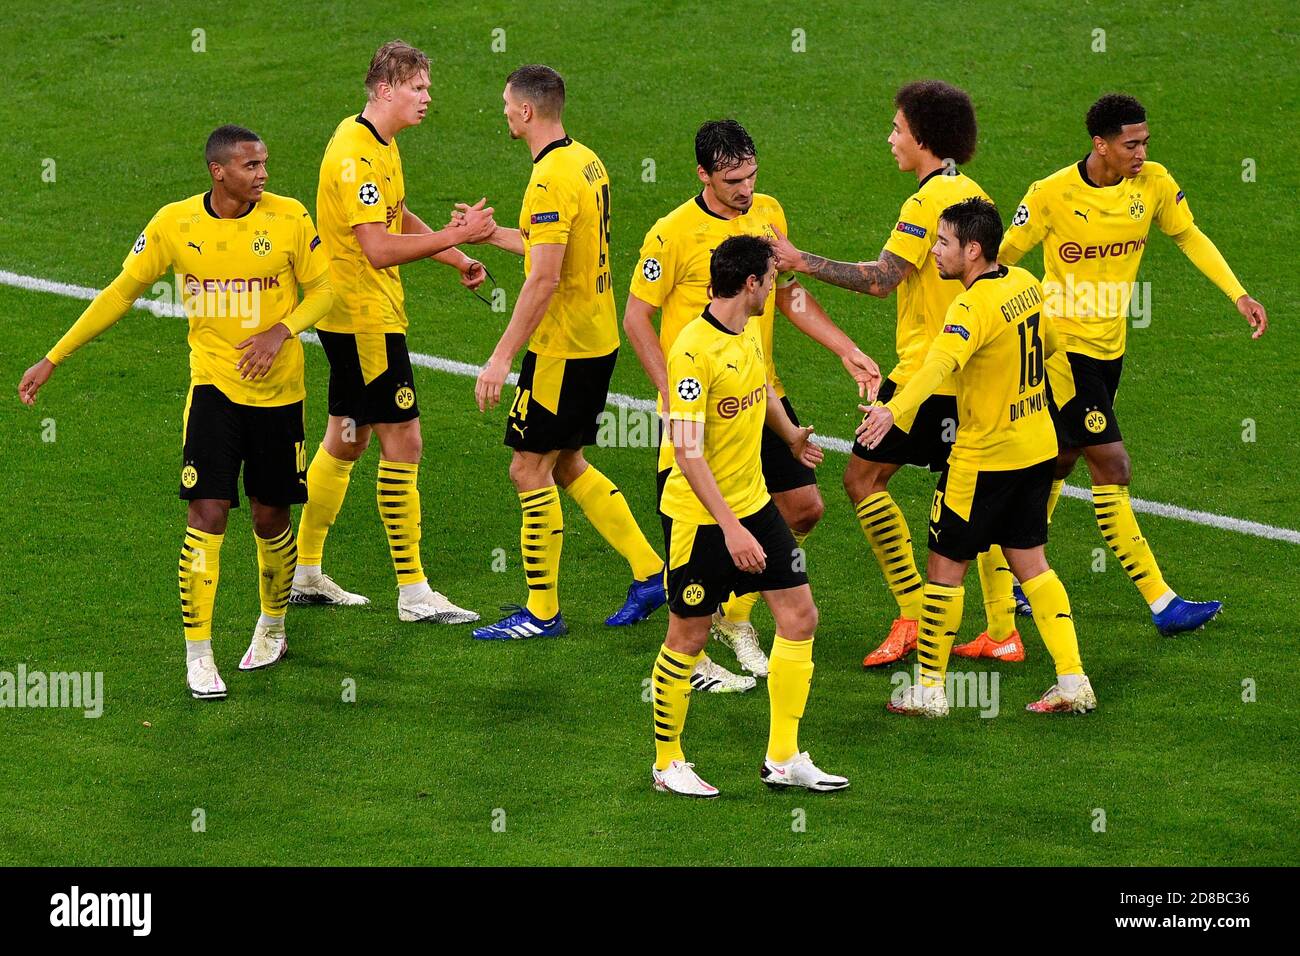 Dortmund, Germany. 28th Oct, 2020. Football: Champions League, Borussia  Dortmund - Zenit St. Petersburg, Group stage, Group F, Matchday 2 at Signal  Iduna Park. Dortmund's Erling Haaland (2.vl) celebrates his goal for